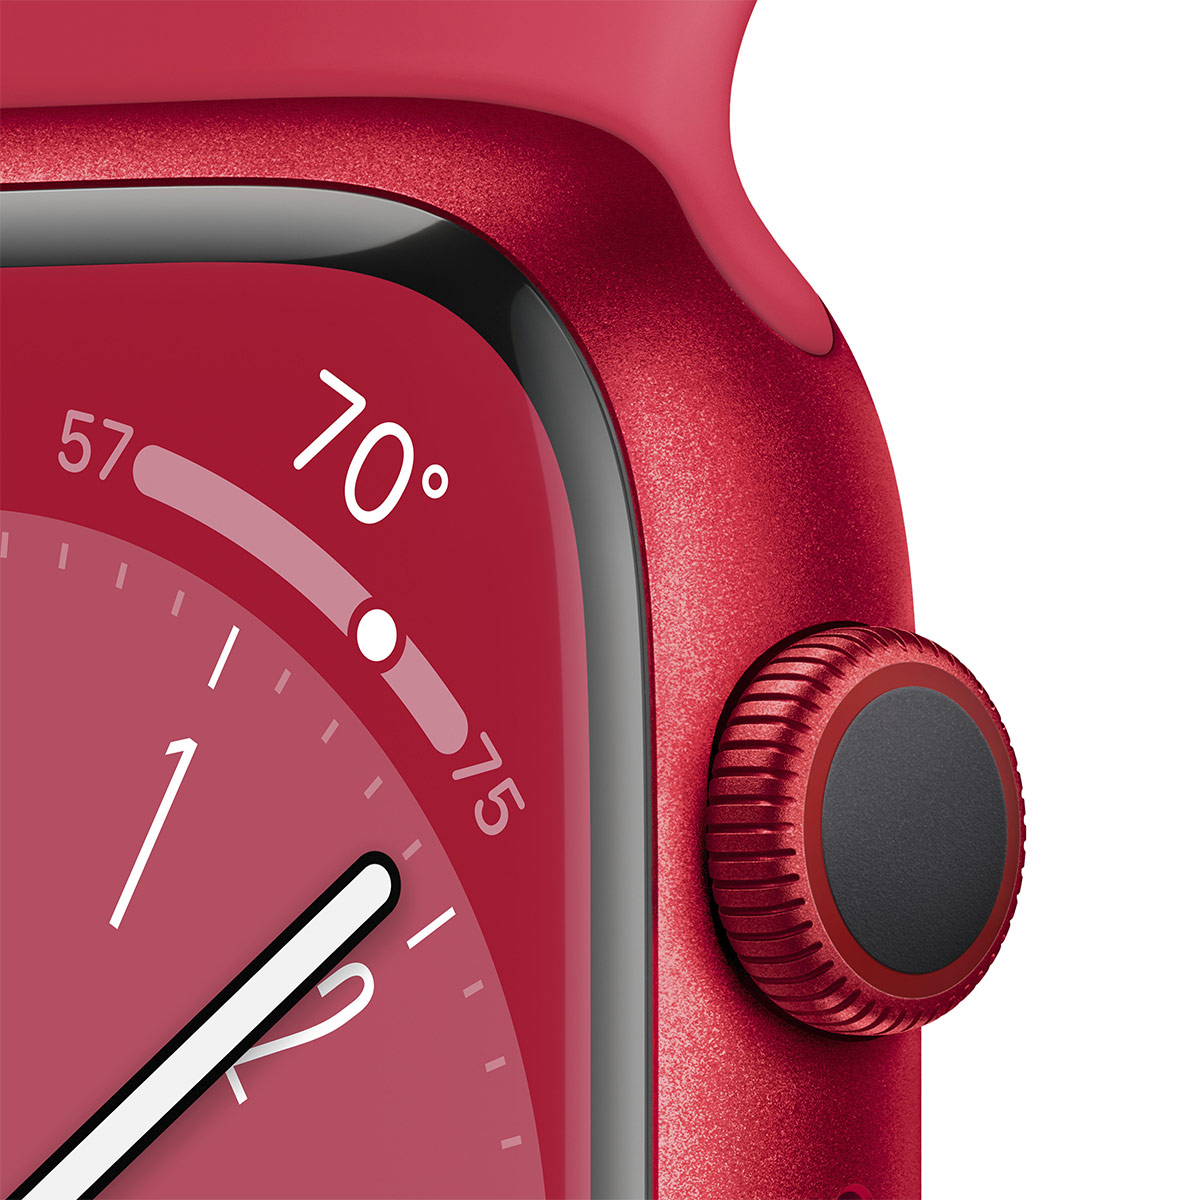 Apple - Reloj Smartwatch Apple Watch Series 8 GPS LTE 41mm Aluminio (Product)RED con Correa Deportiva (Product)RED